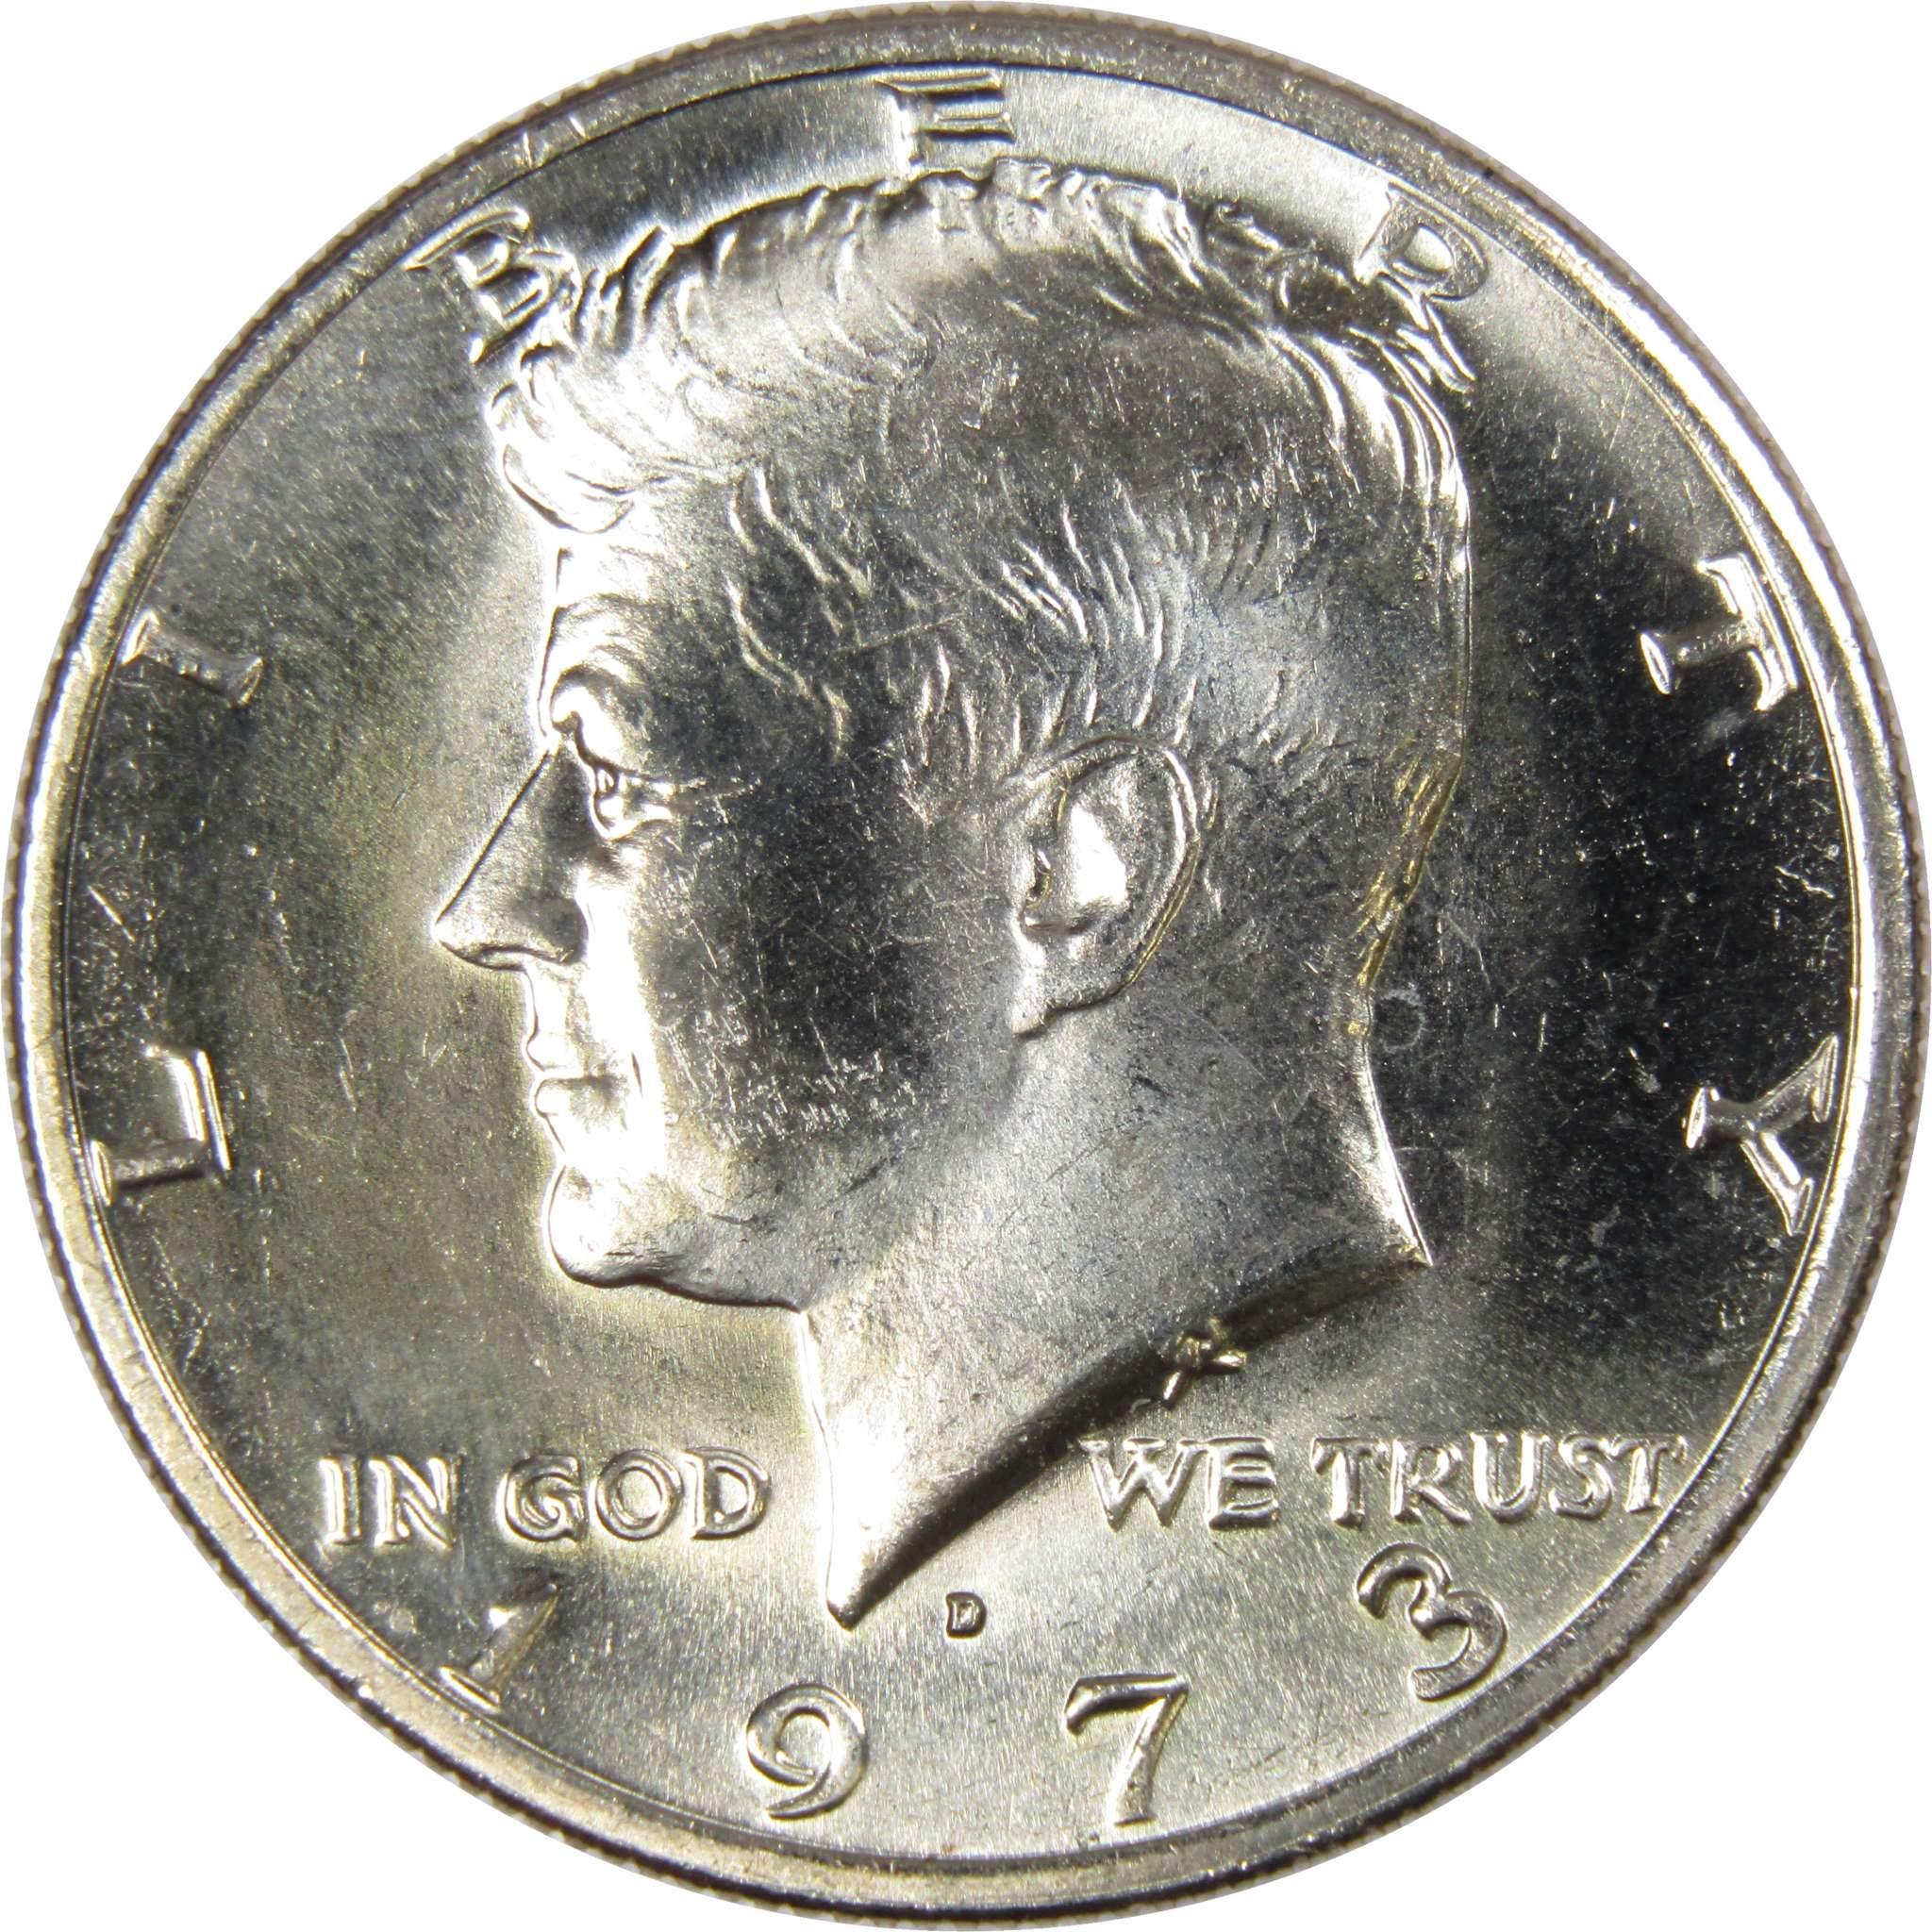 1973 D Kennedy Half Dollar BU Uncirculated Mint State 50c US Coin Collectible